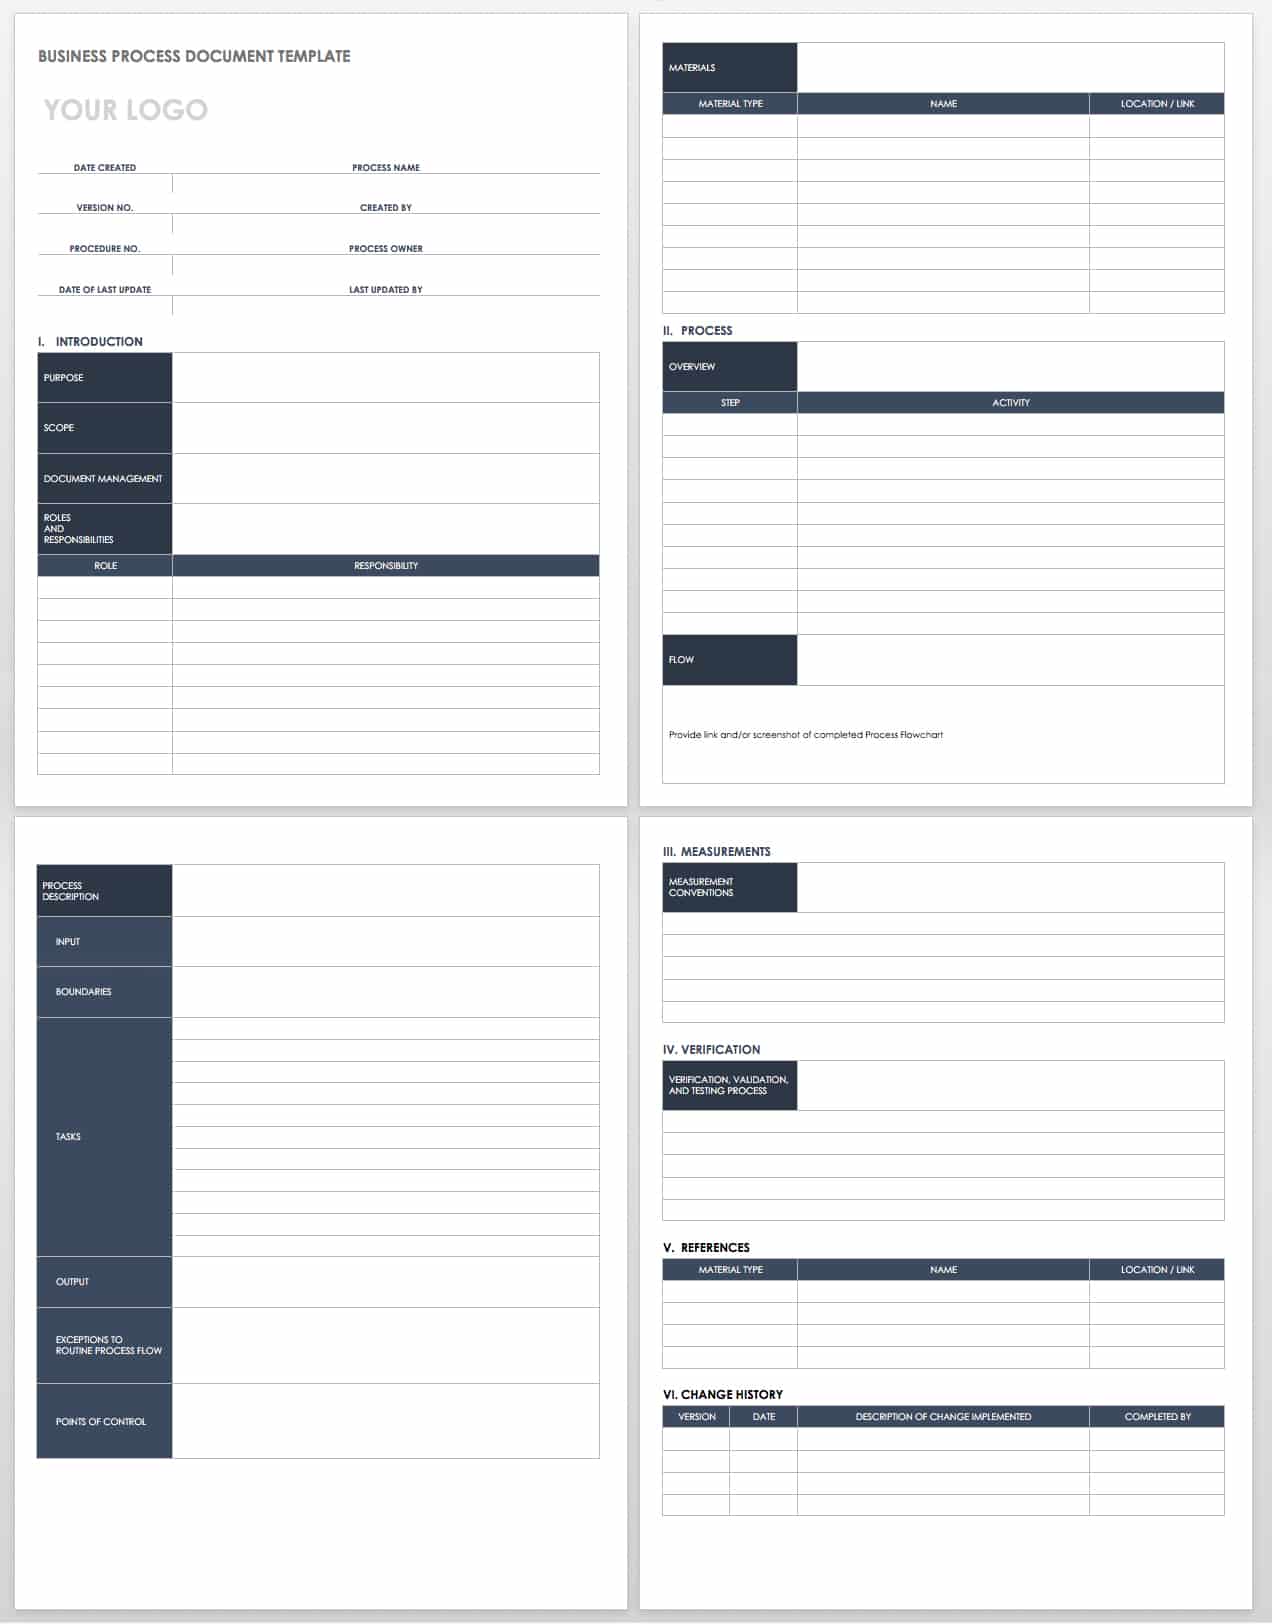 Free Process Document Templates  Smartsheet Throughout Business Process Catalogue Template